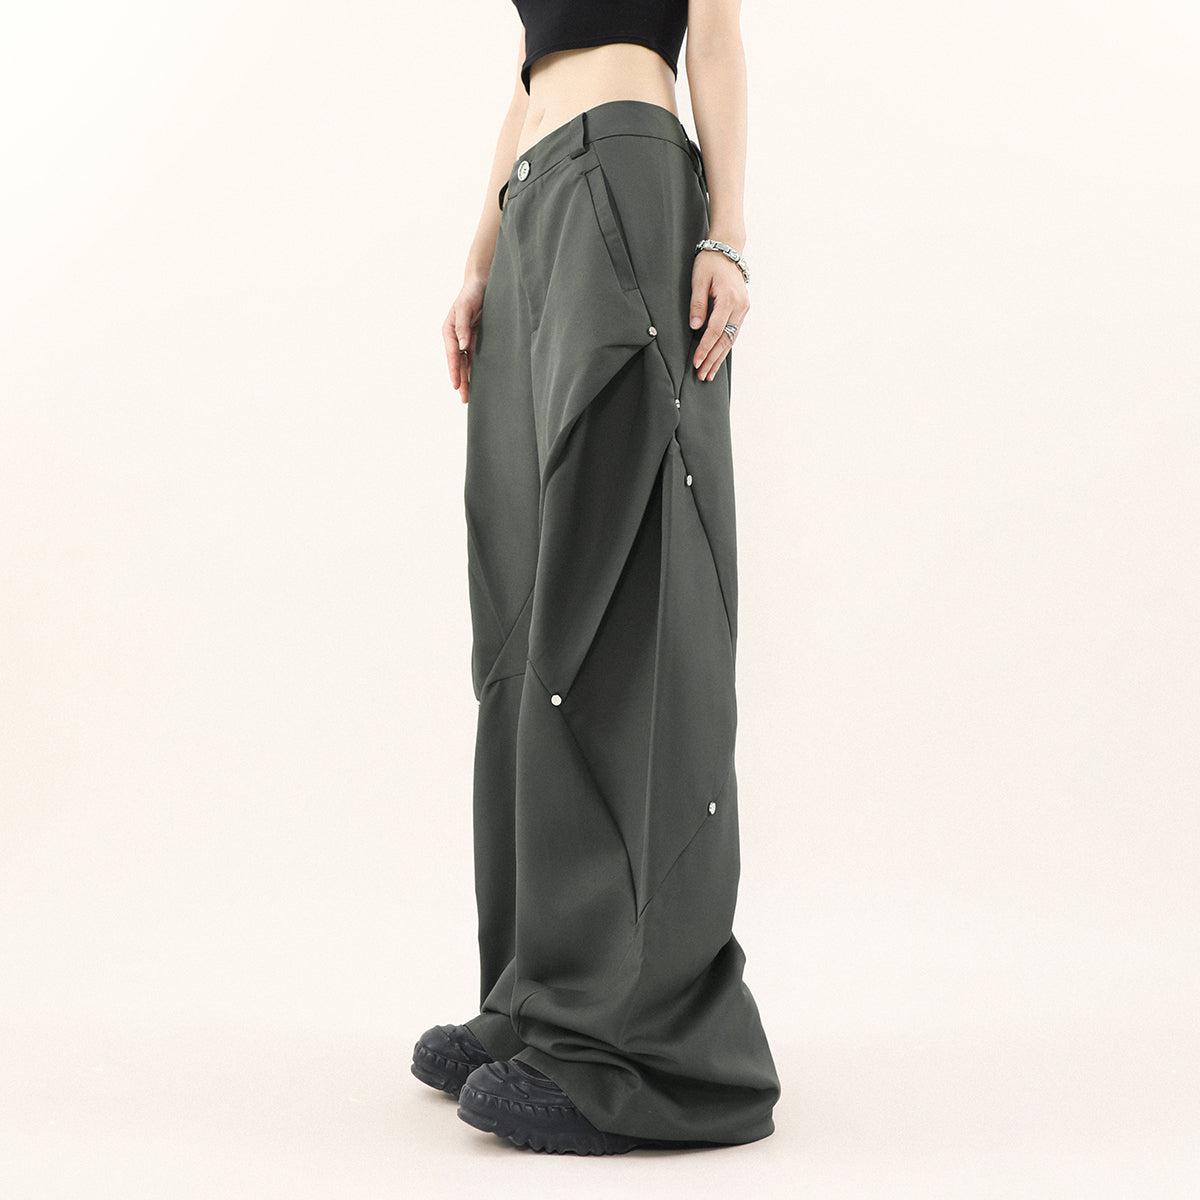 Button Pleated Loose Trousers Korean Street Fashion Pants By Mr Nearly Shop Online at OH Vault